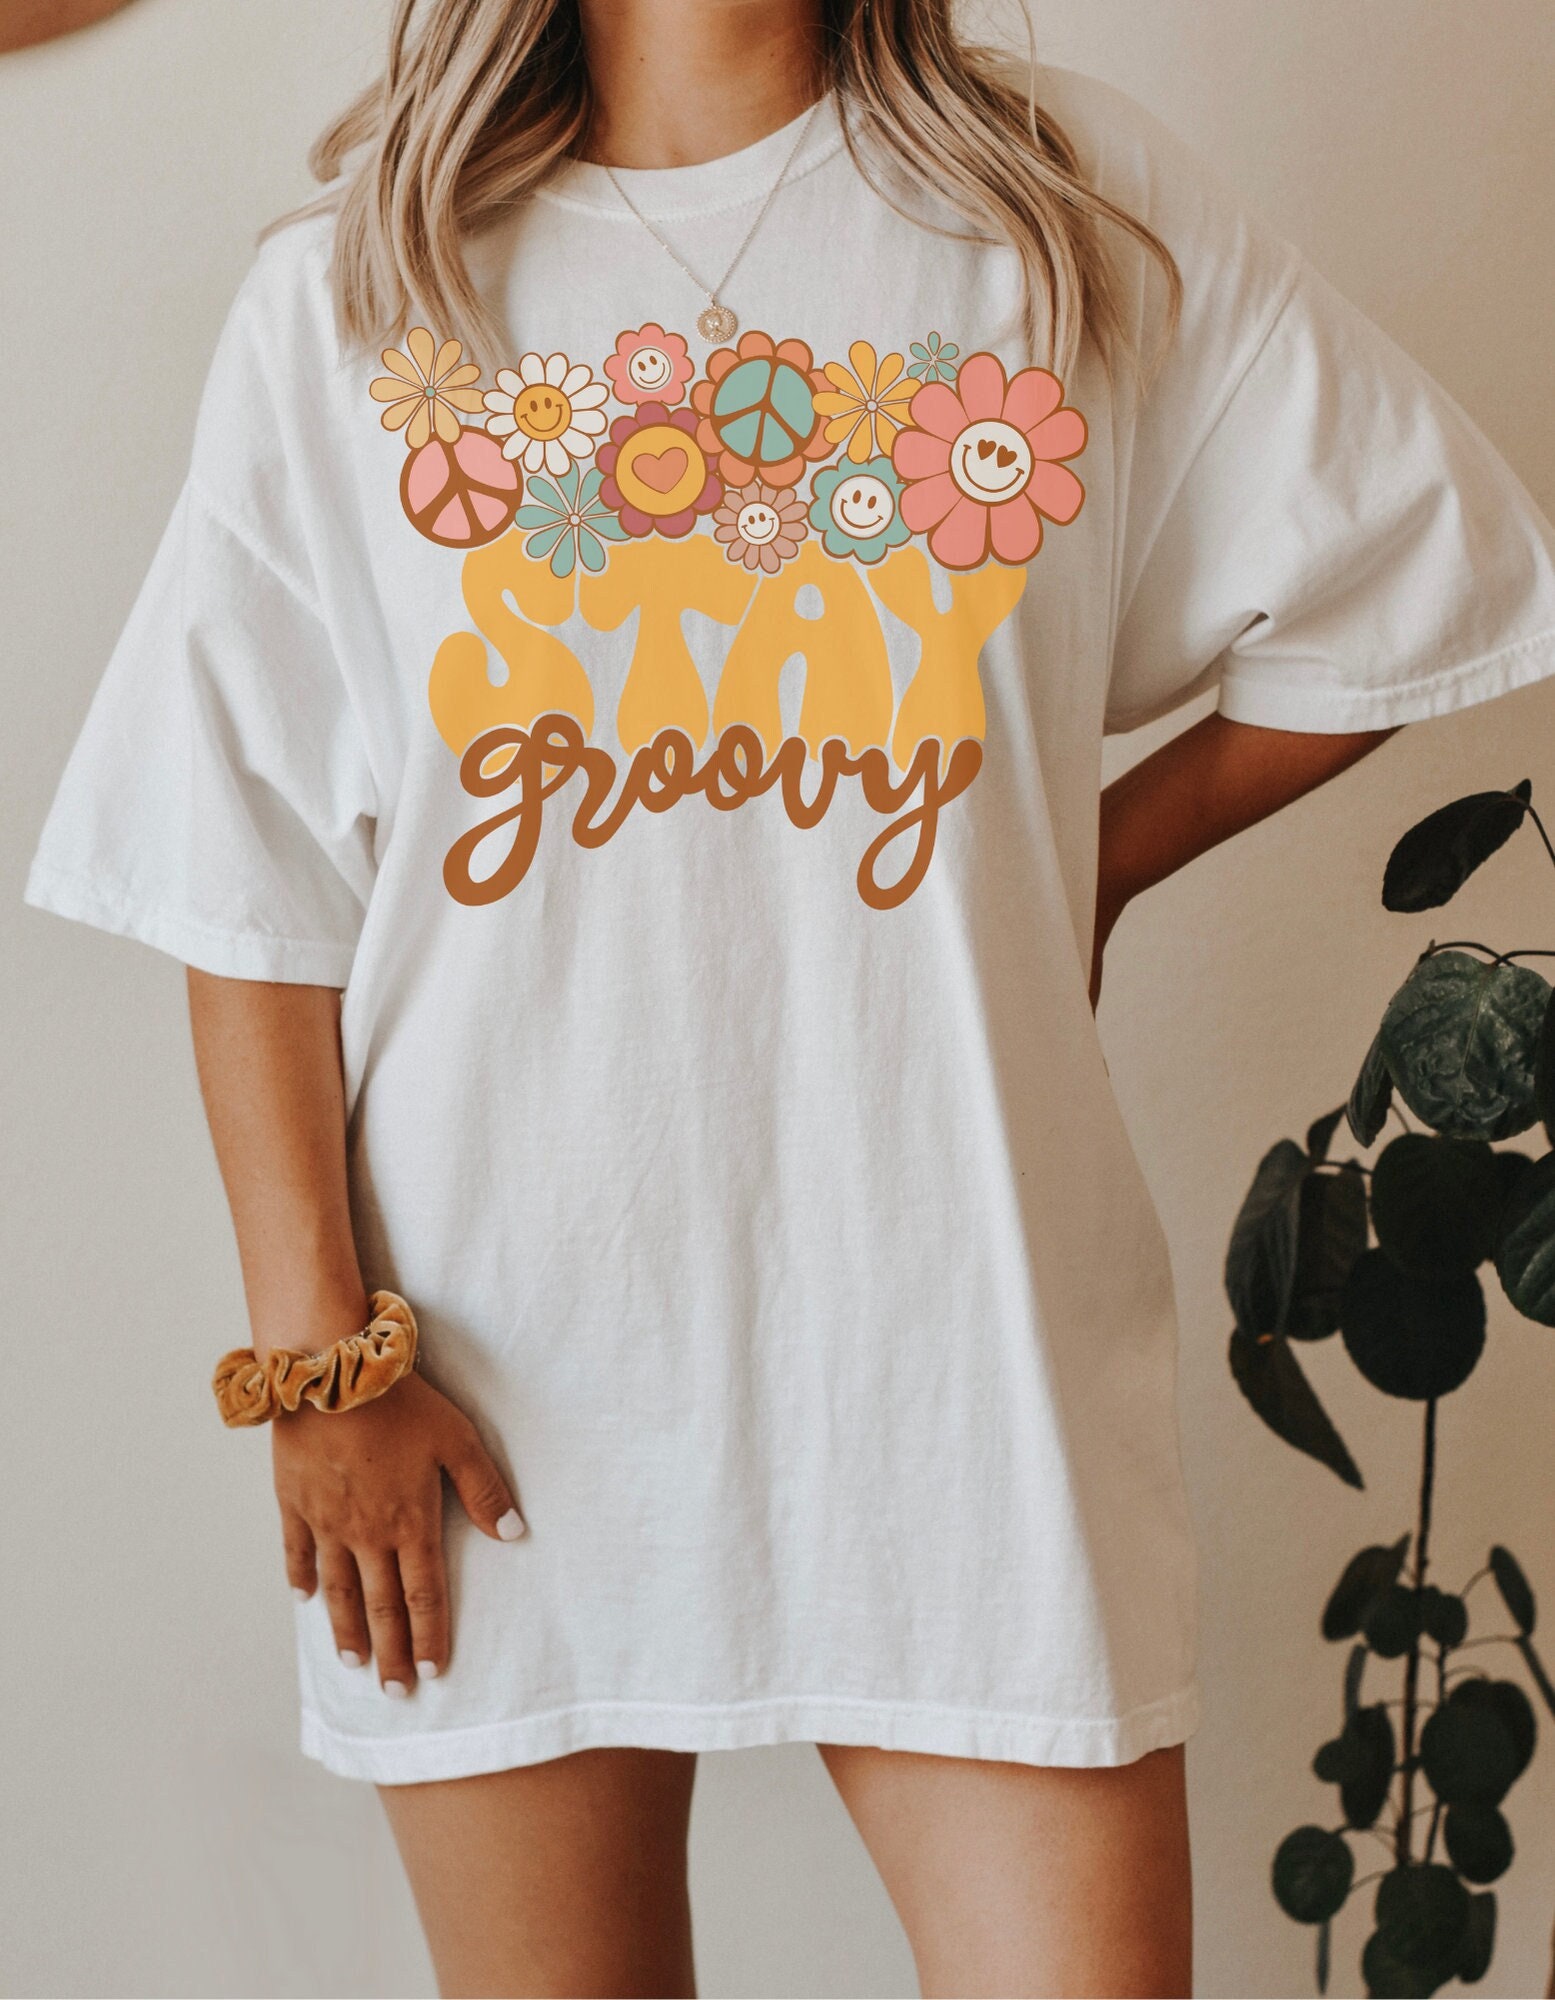 Stay Groovy Bo Ho Oversized Comfort Colors Tee Shirt Hippie T Shirt, 70 ...